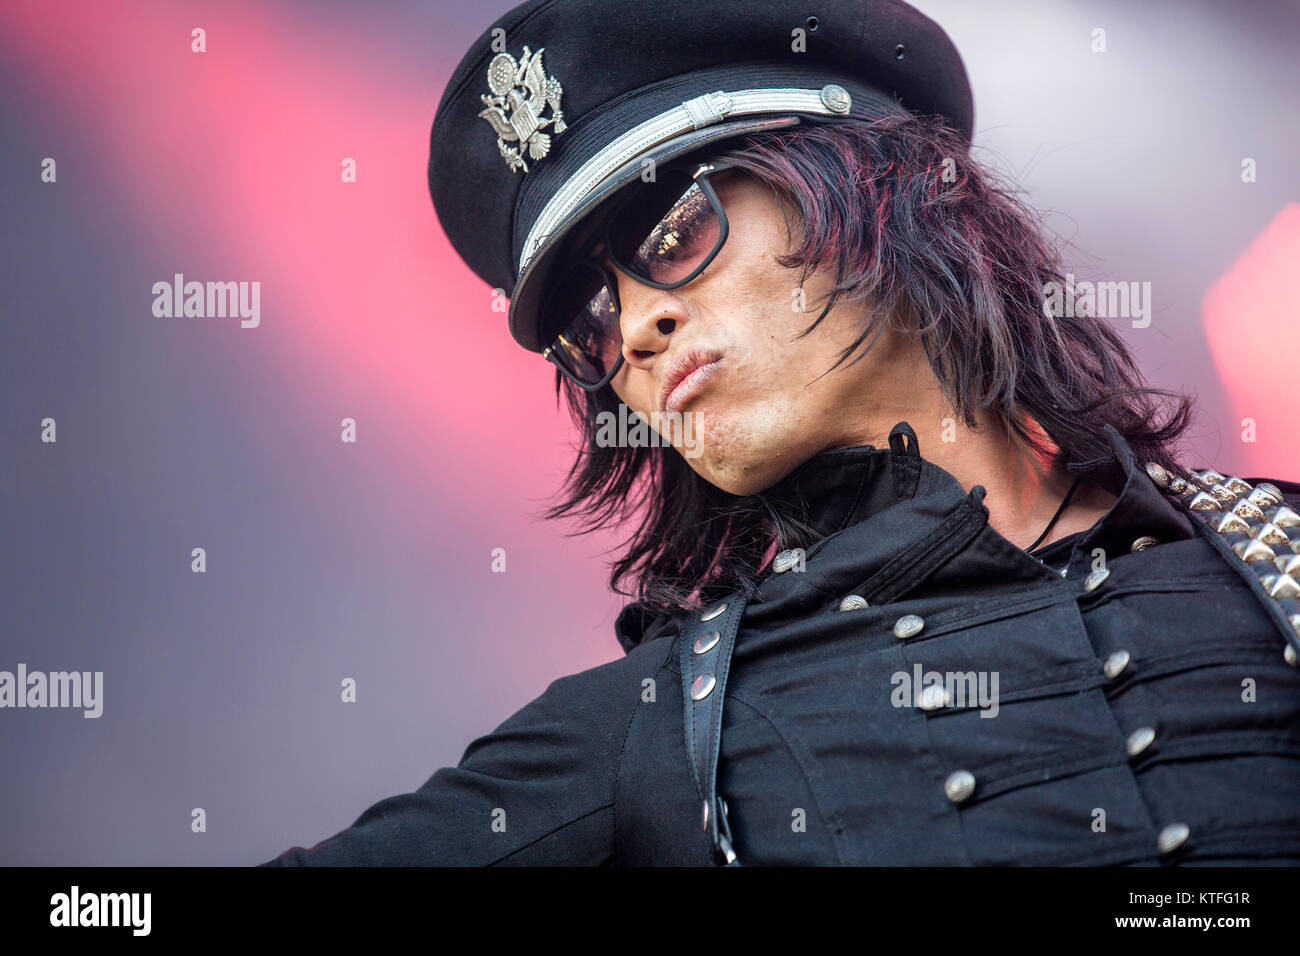 The American hard rock band L.A. Guns performs a live concert at the Sweden Rock Festival 2016. Here guitarist Michael Grant is seen live on stage. Sweden, 09/06 2016. Stock Photo